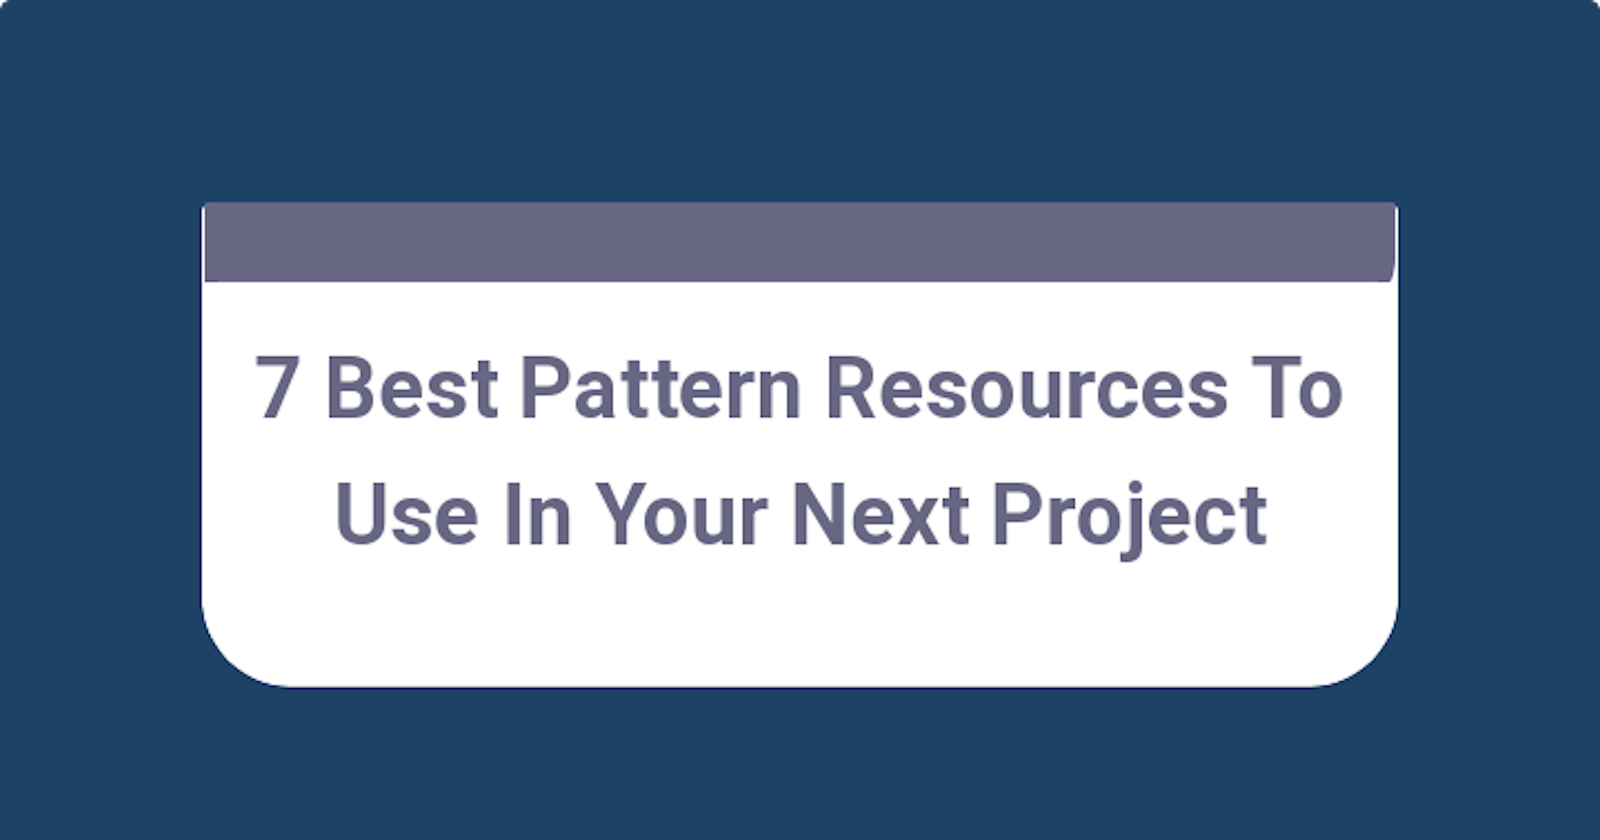 7 Best Pattern Resources To Use In Your Next Project